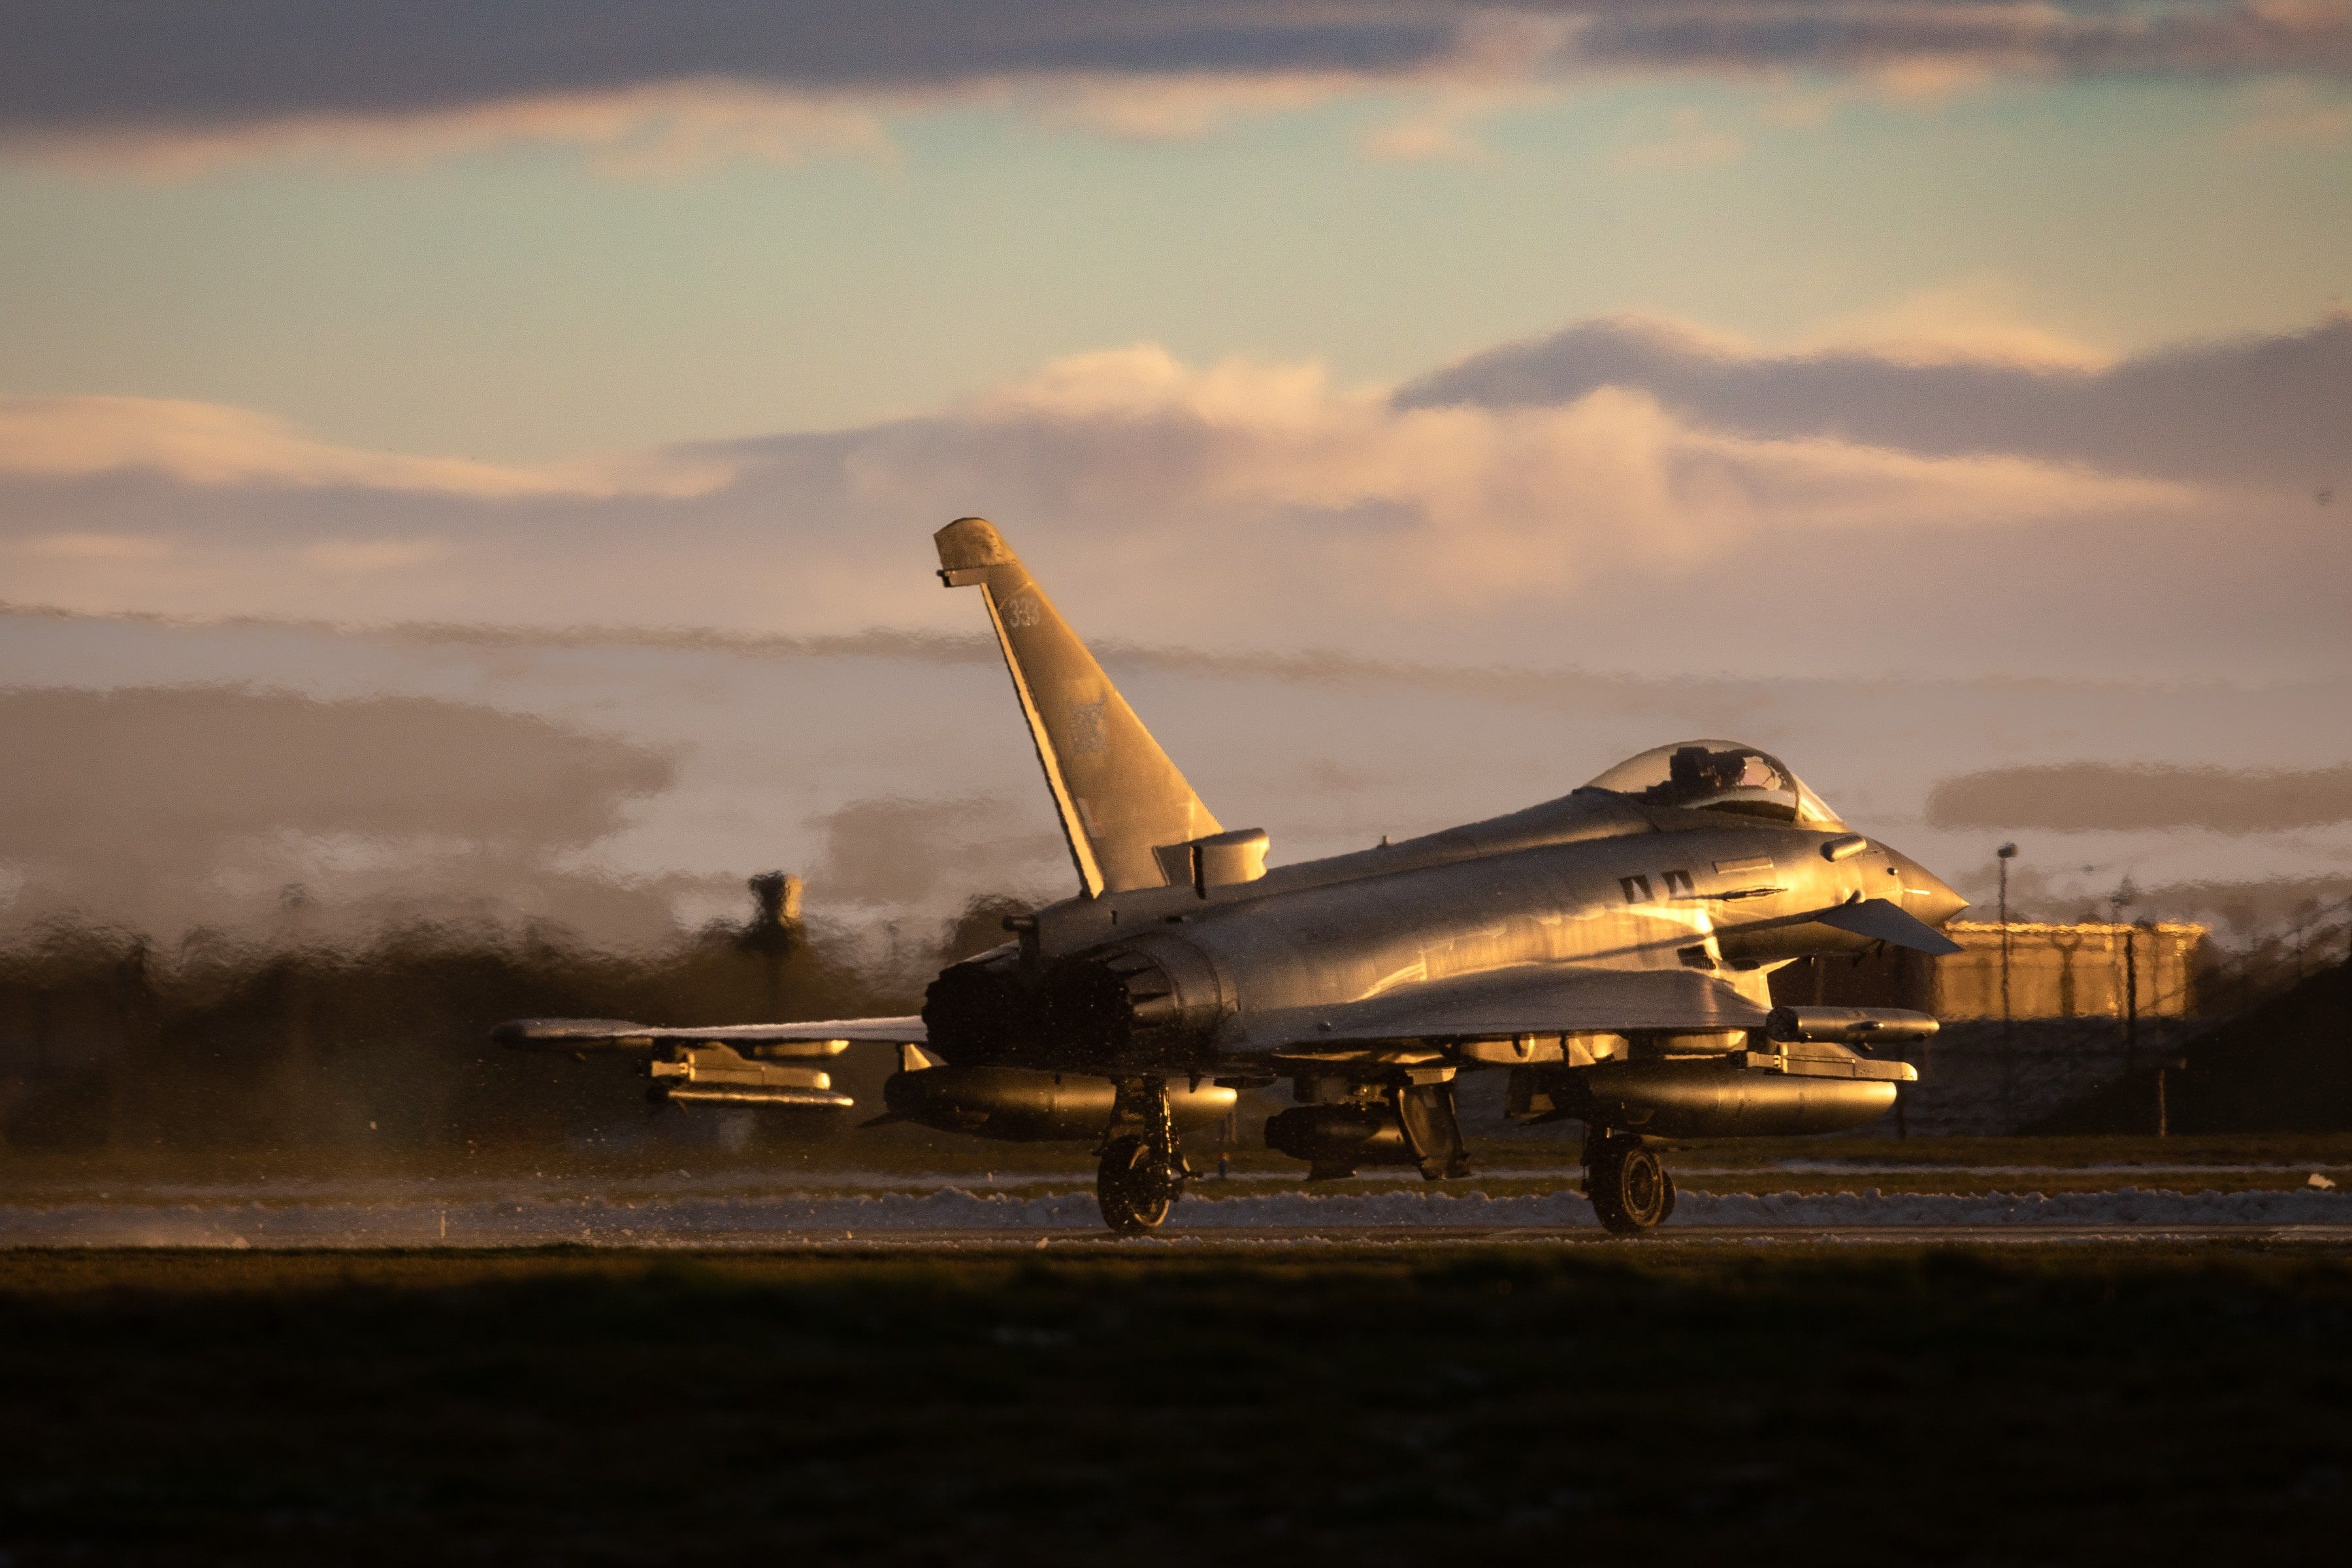 Typhoon on runway with the heat trail distorting the background